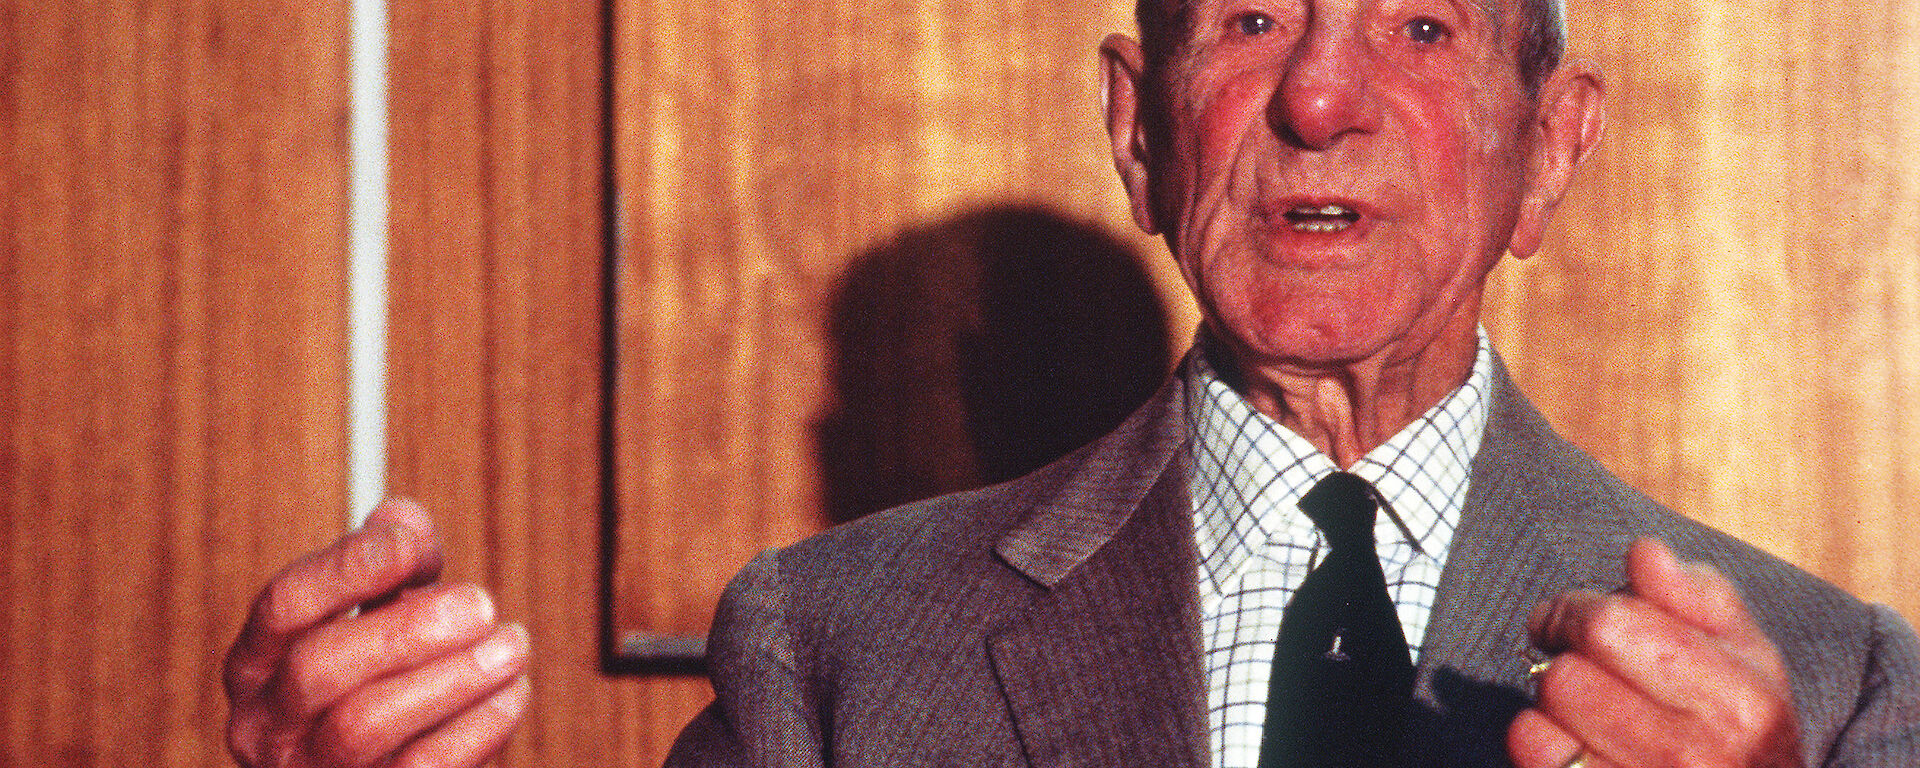 Eric Webb (1889–1984) speaking at the Australian Antarctic Division on 13 December 1977, aged 88